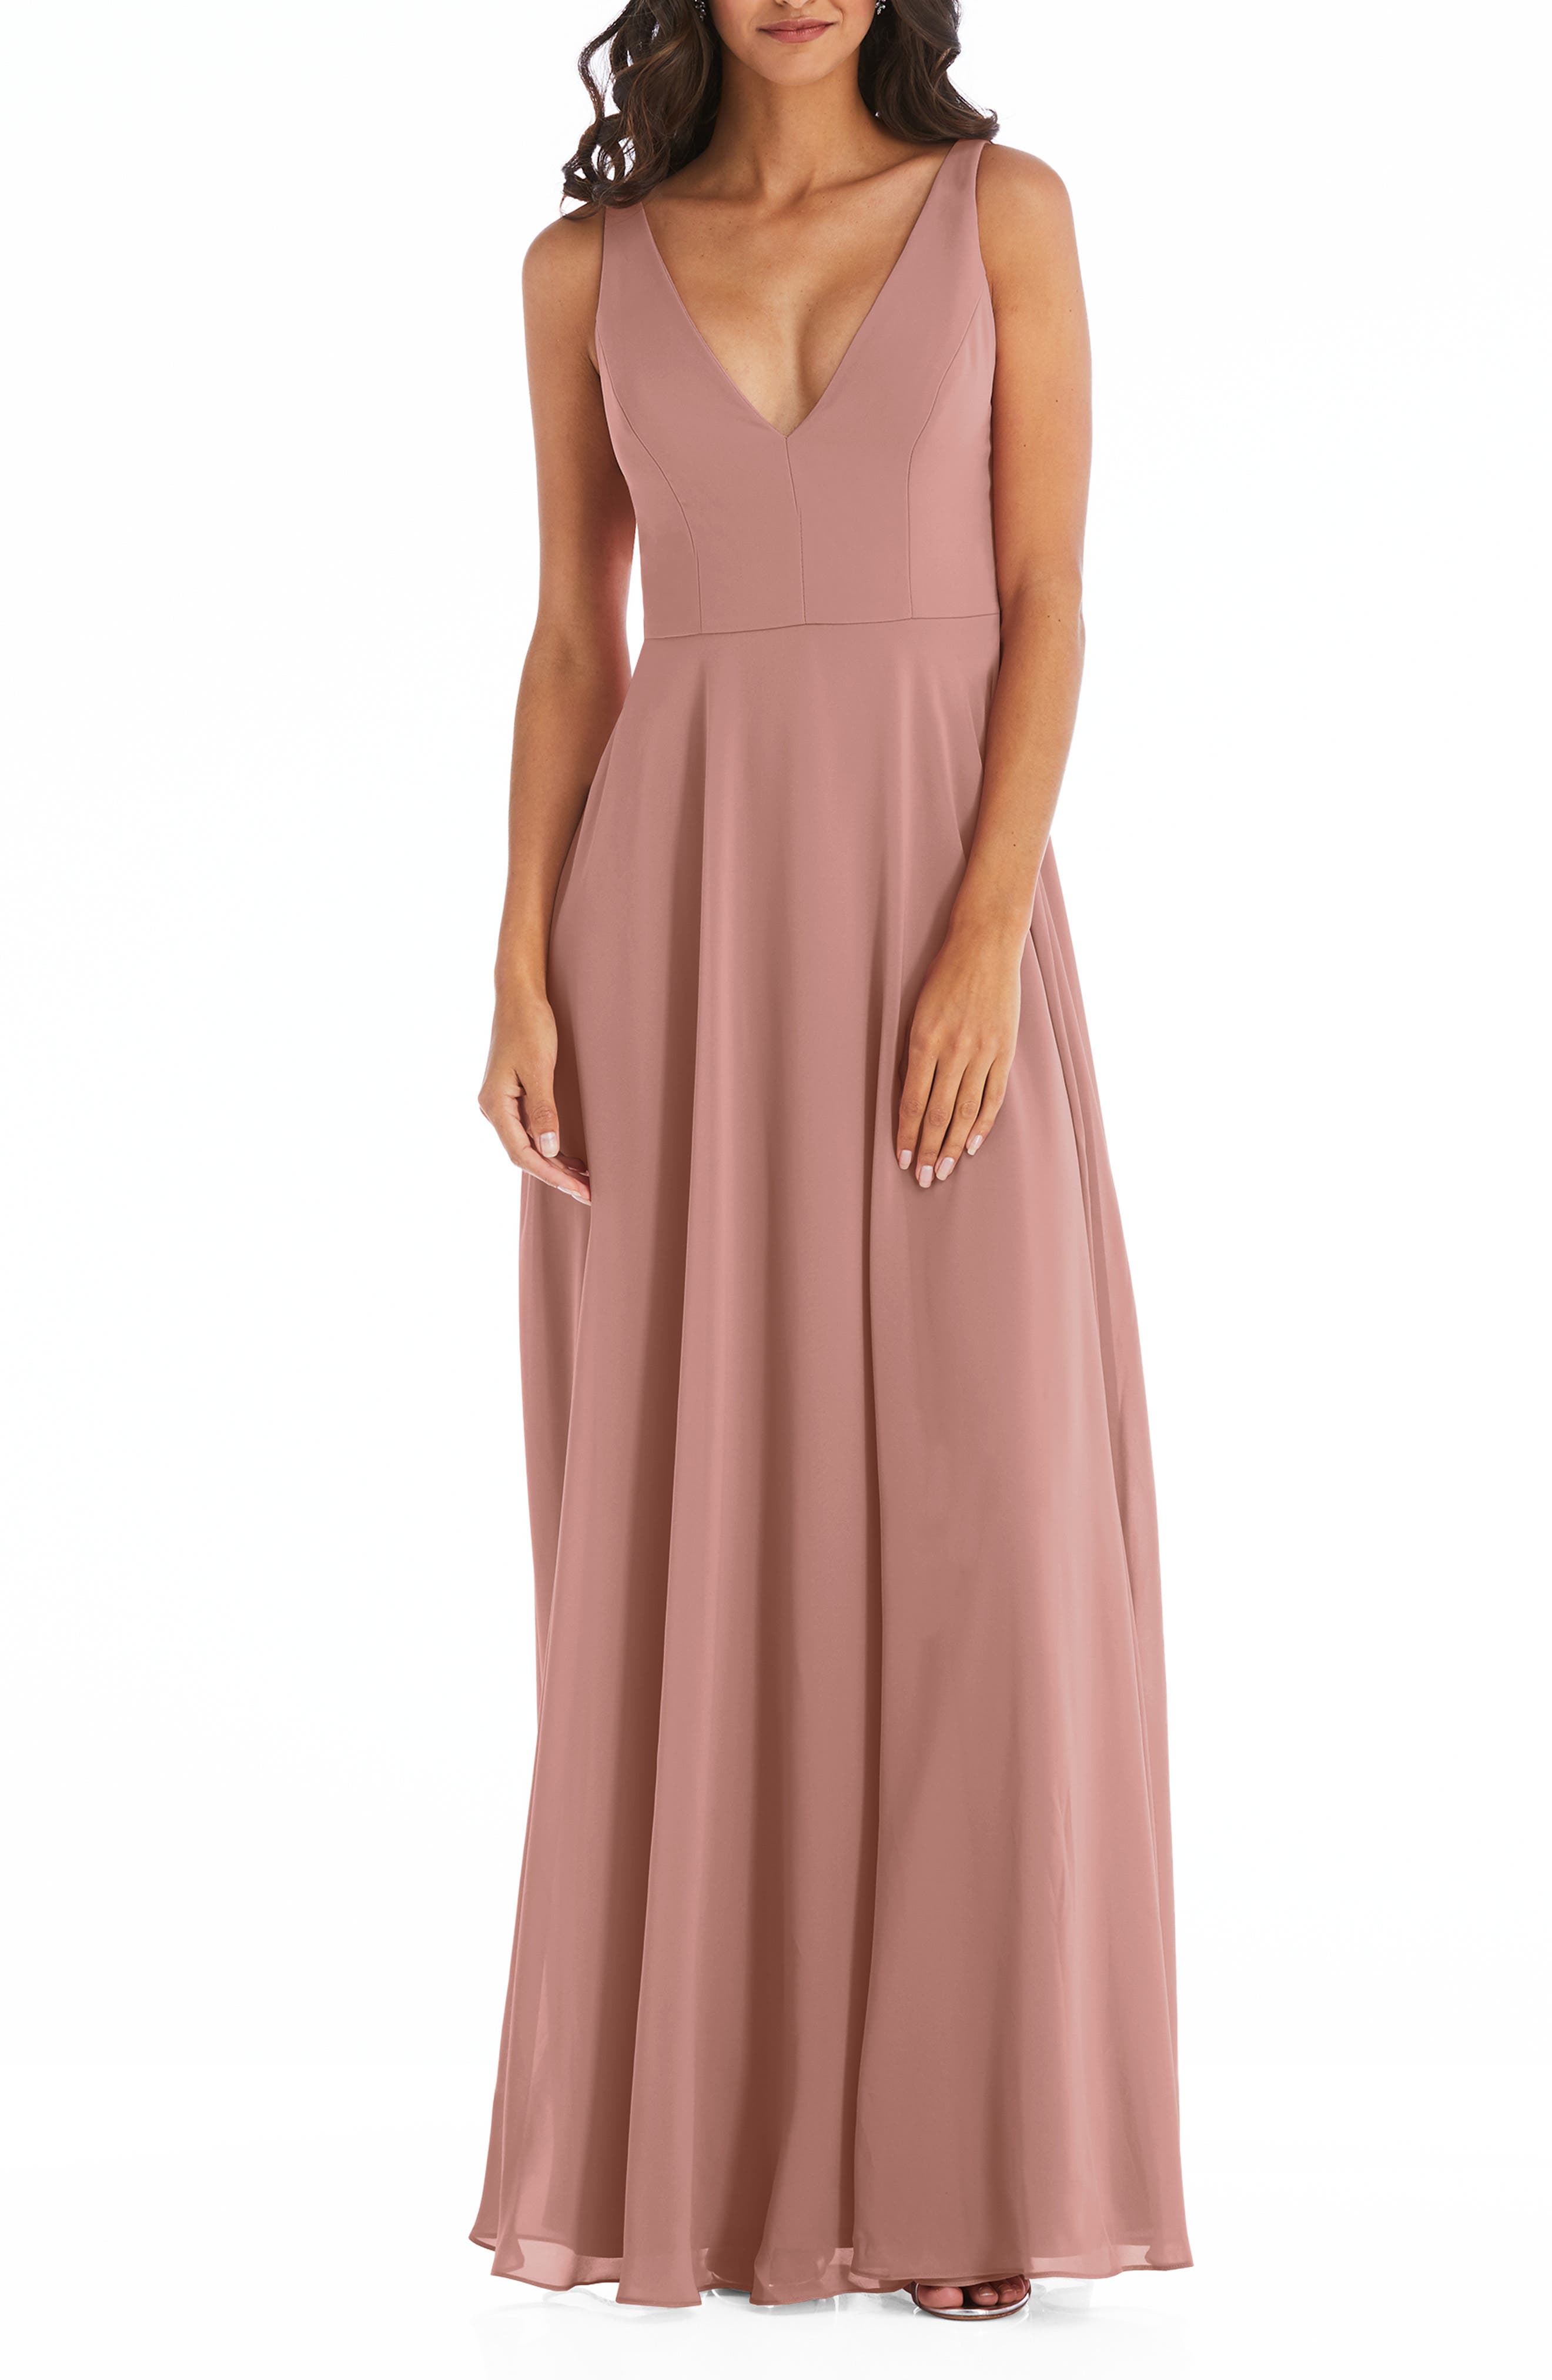 Chiffon Formal Dresses ☀ Evening Gowns ...